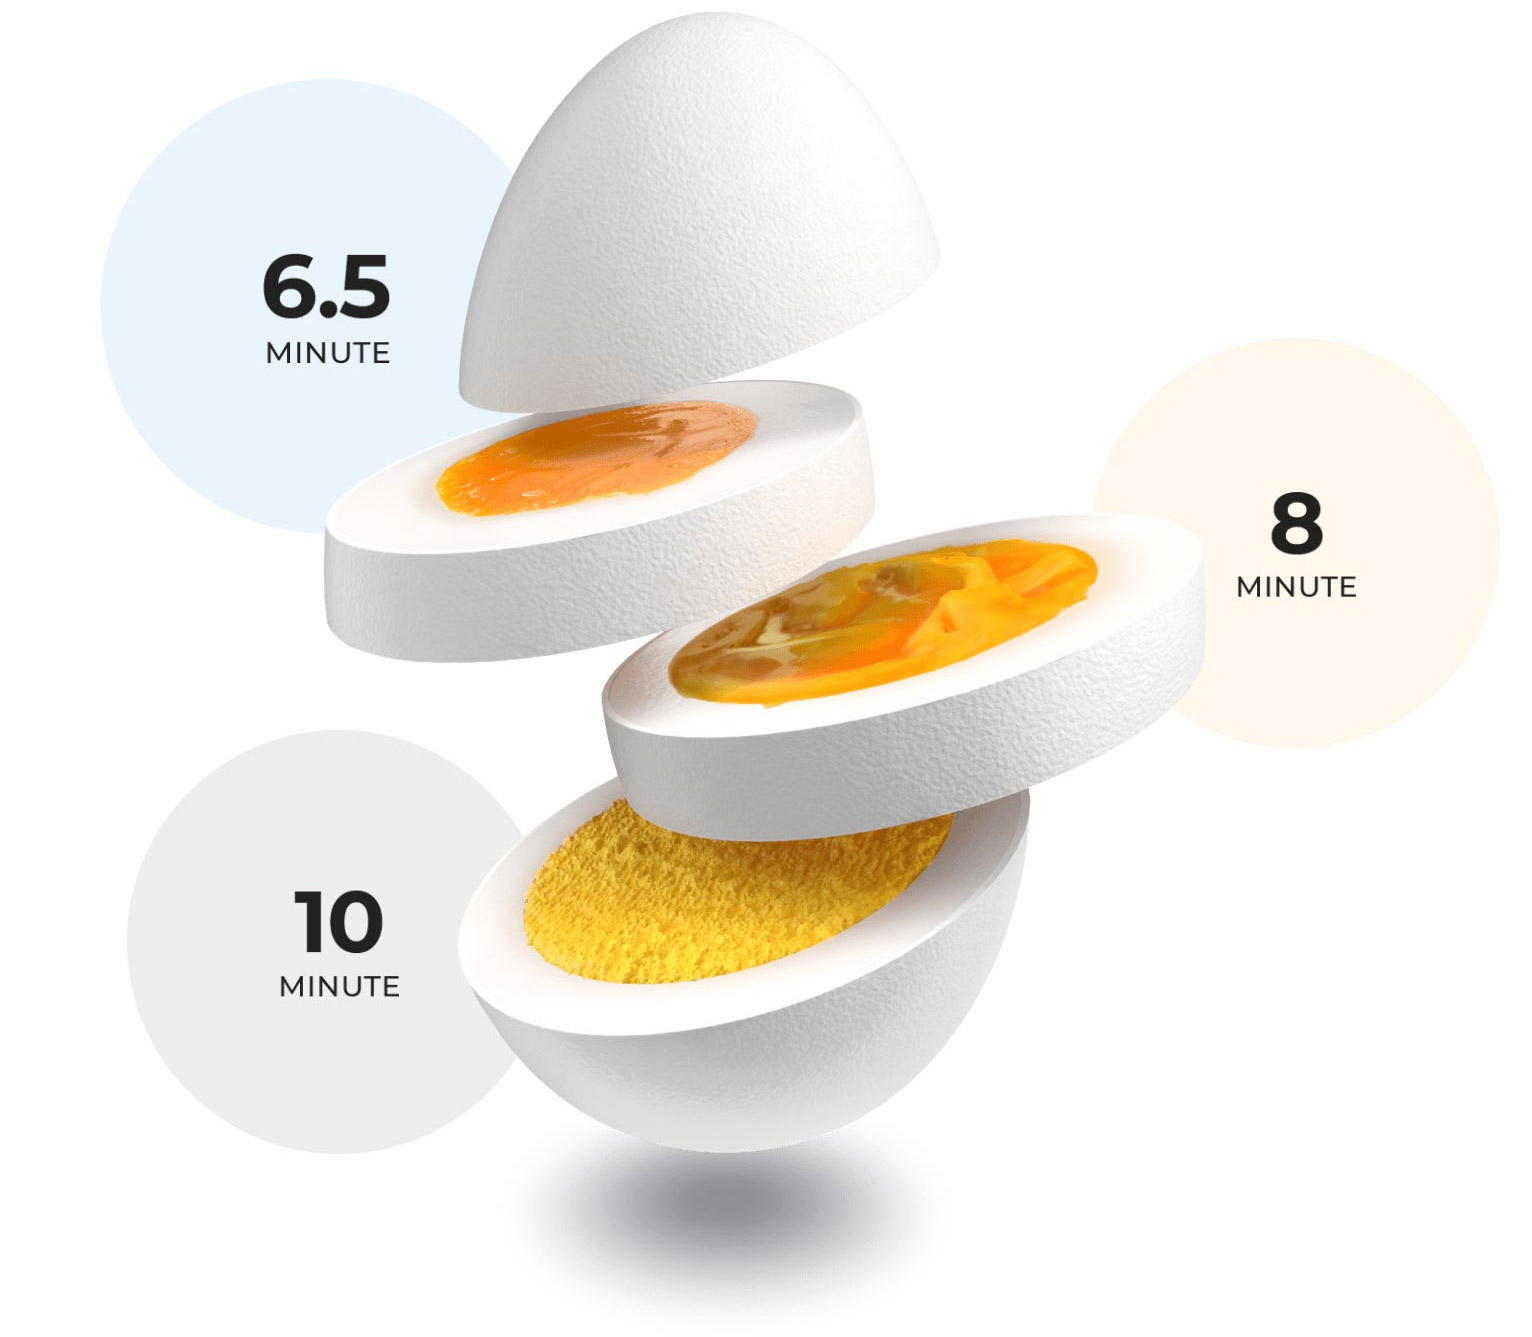 cooking times for boiled eggs: 6.5 minutes, 8 minutes, 10 minutes